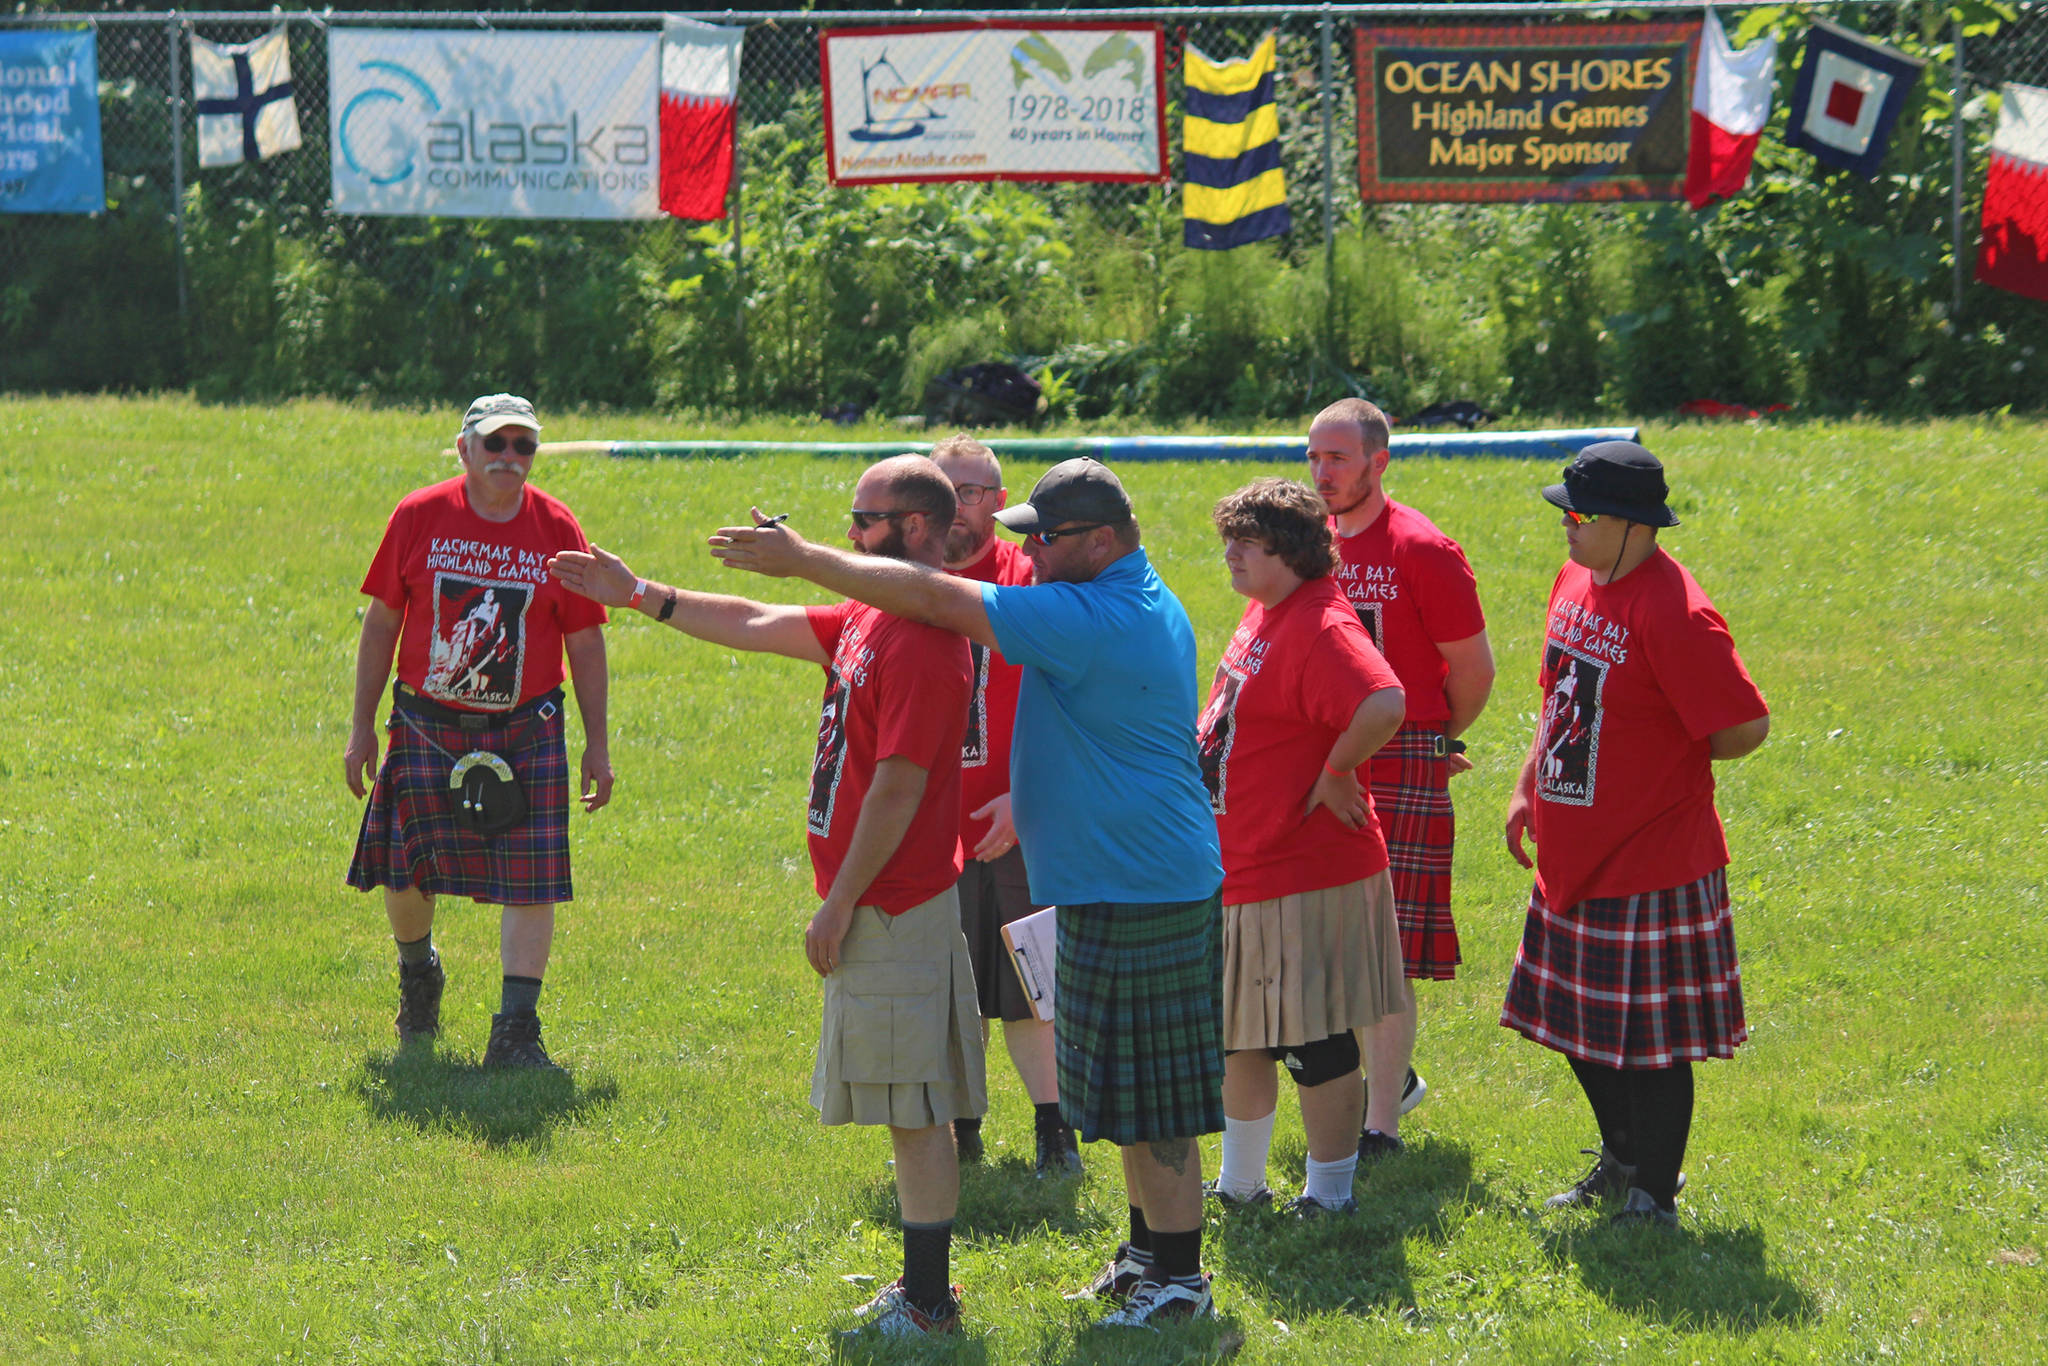 A coach gives novice competitors advice on how to throw a caber on Saturday, July 7, 2018 during the Kachemak Bay Scottish Highland Games at Karen Hornaday Park in Homer, Alaska. Novices must practice before actually participating in the caber throw. (Photo by Megan Pacer/Homer News)